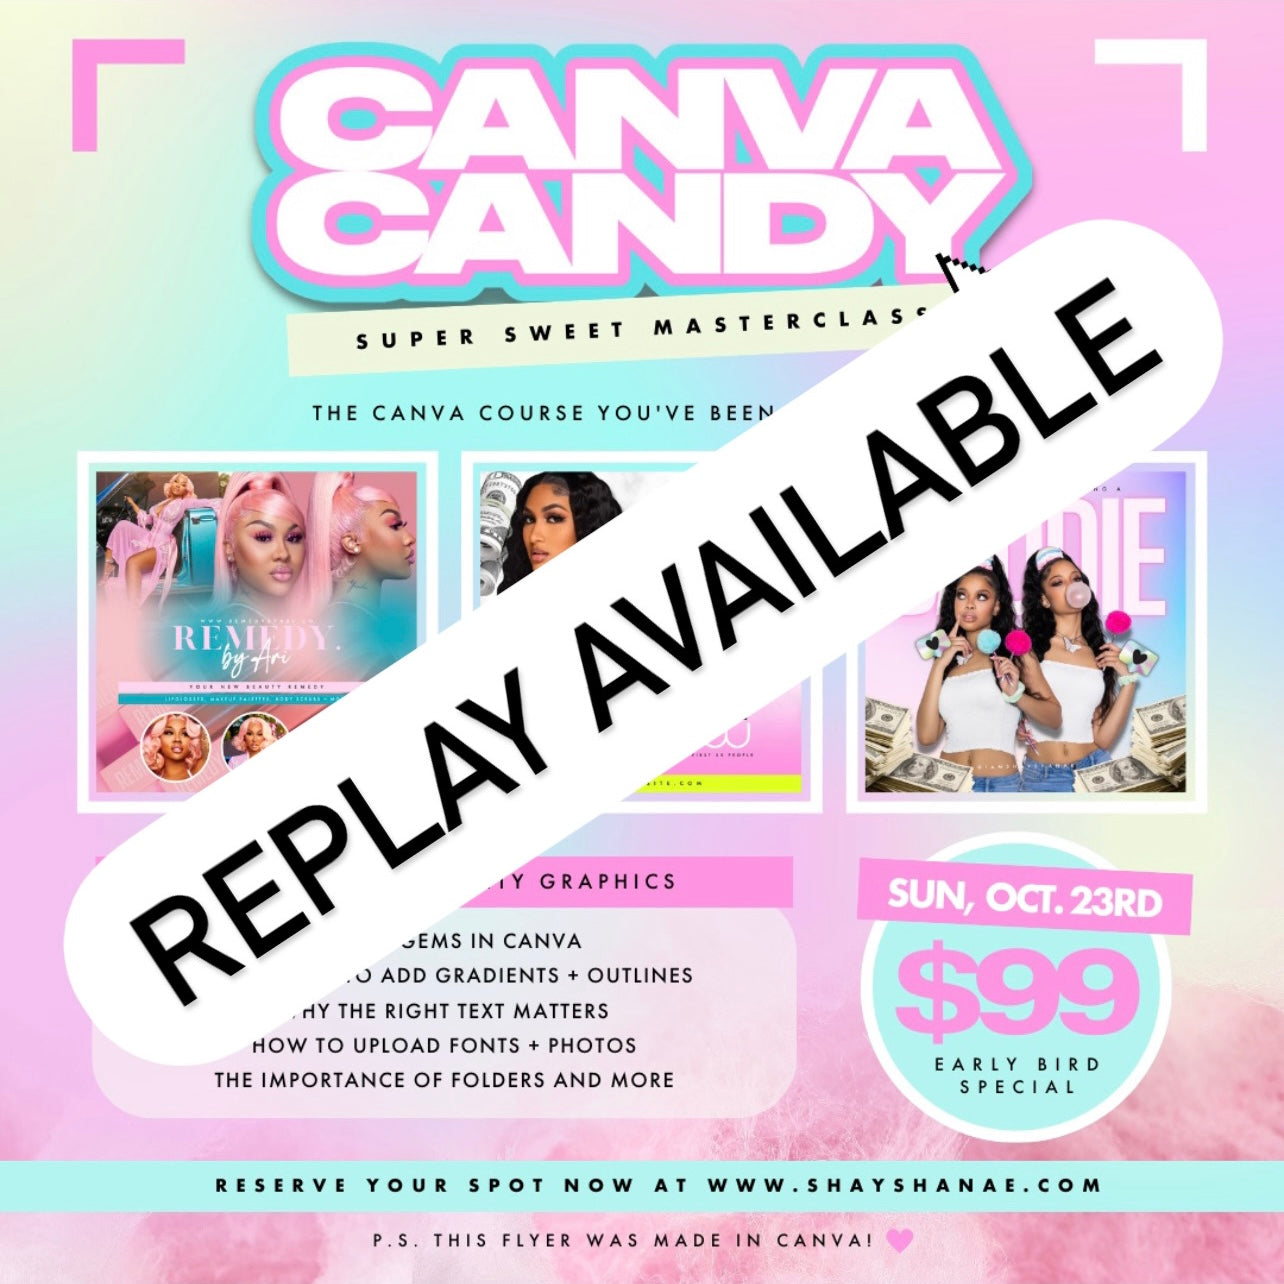 Canva Candy (Part 1) Replay